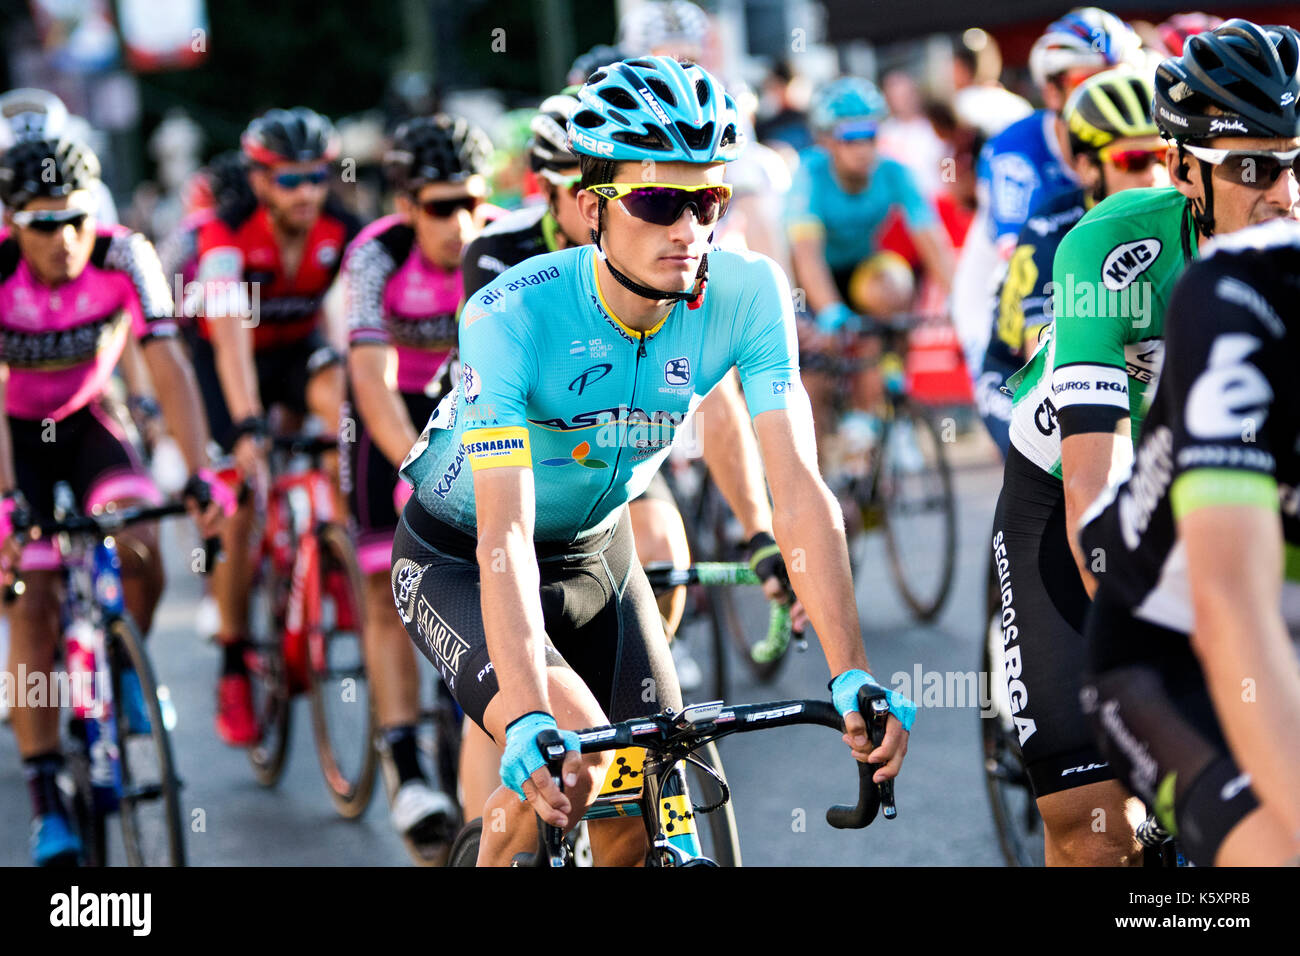 Madrid, Spain. 10th September, 2017. Cyclist of Astana Team rides  during the stage 21 of Tour of Spain (Vuelta a España) between Madrid and Madrid on September 10, 2017 in Madrid, Spain. ©David Gato/Alamy Live News Stock Photo